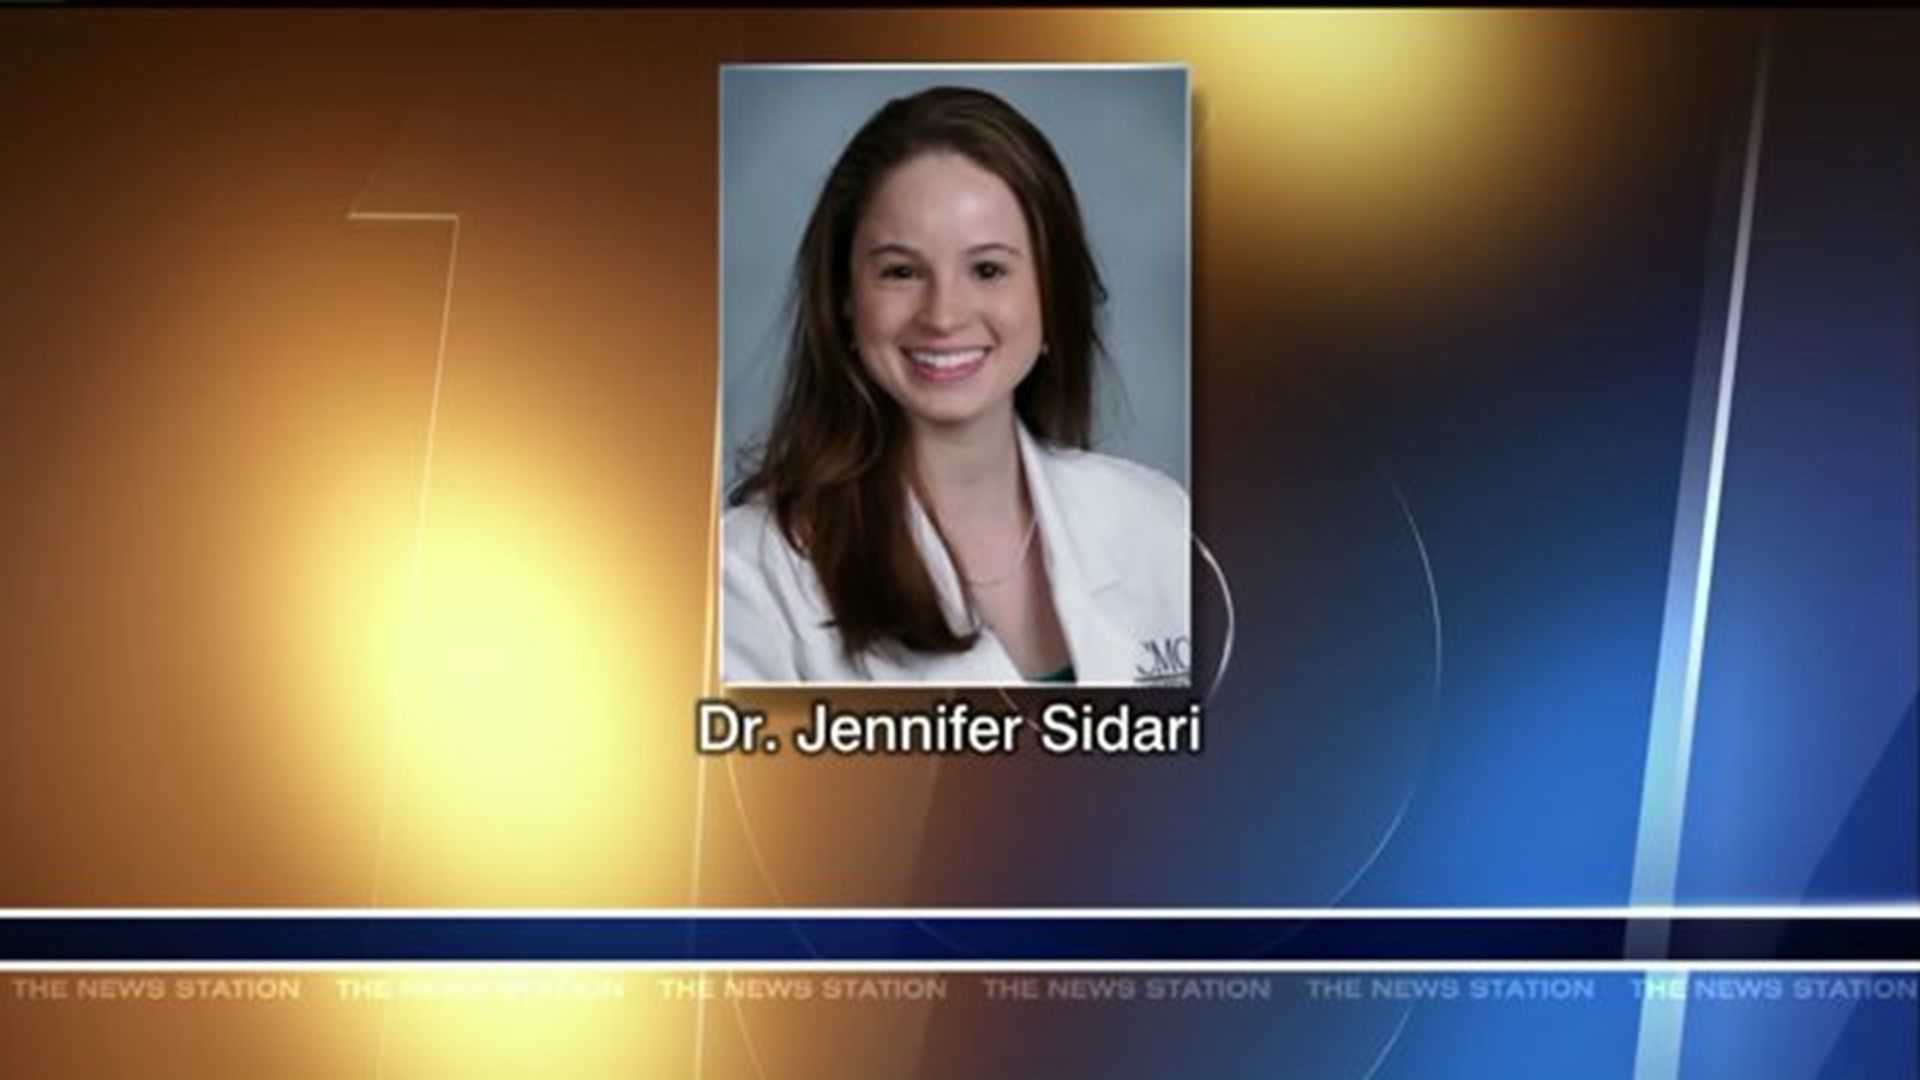 Lawsuit Over Death of Doctor Goes to Court